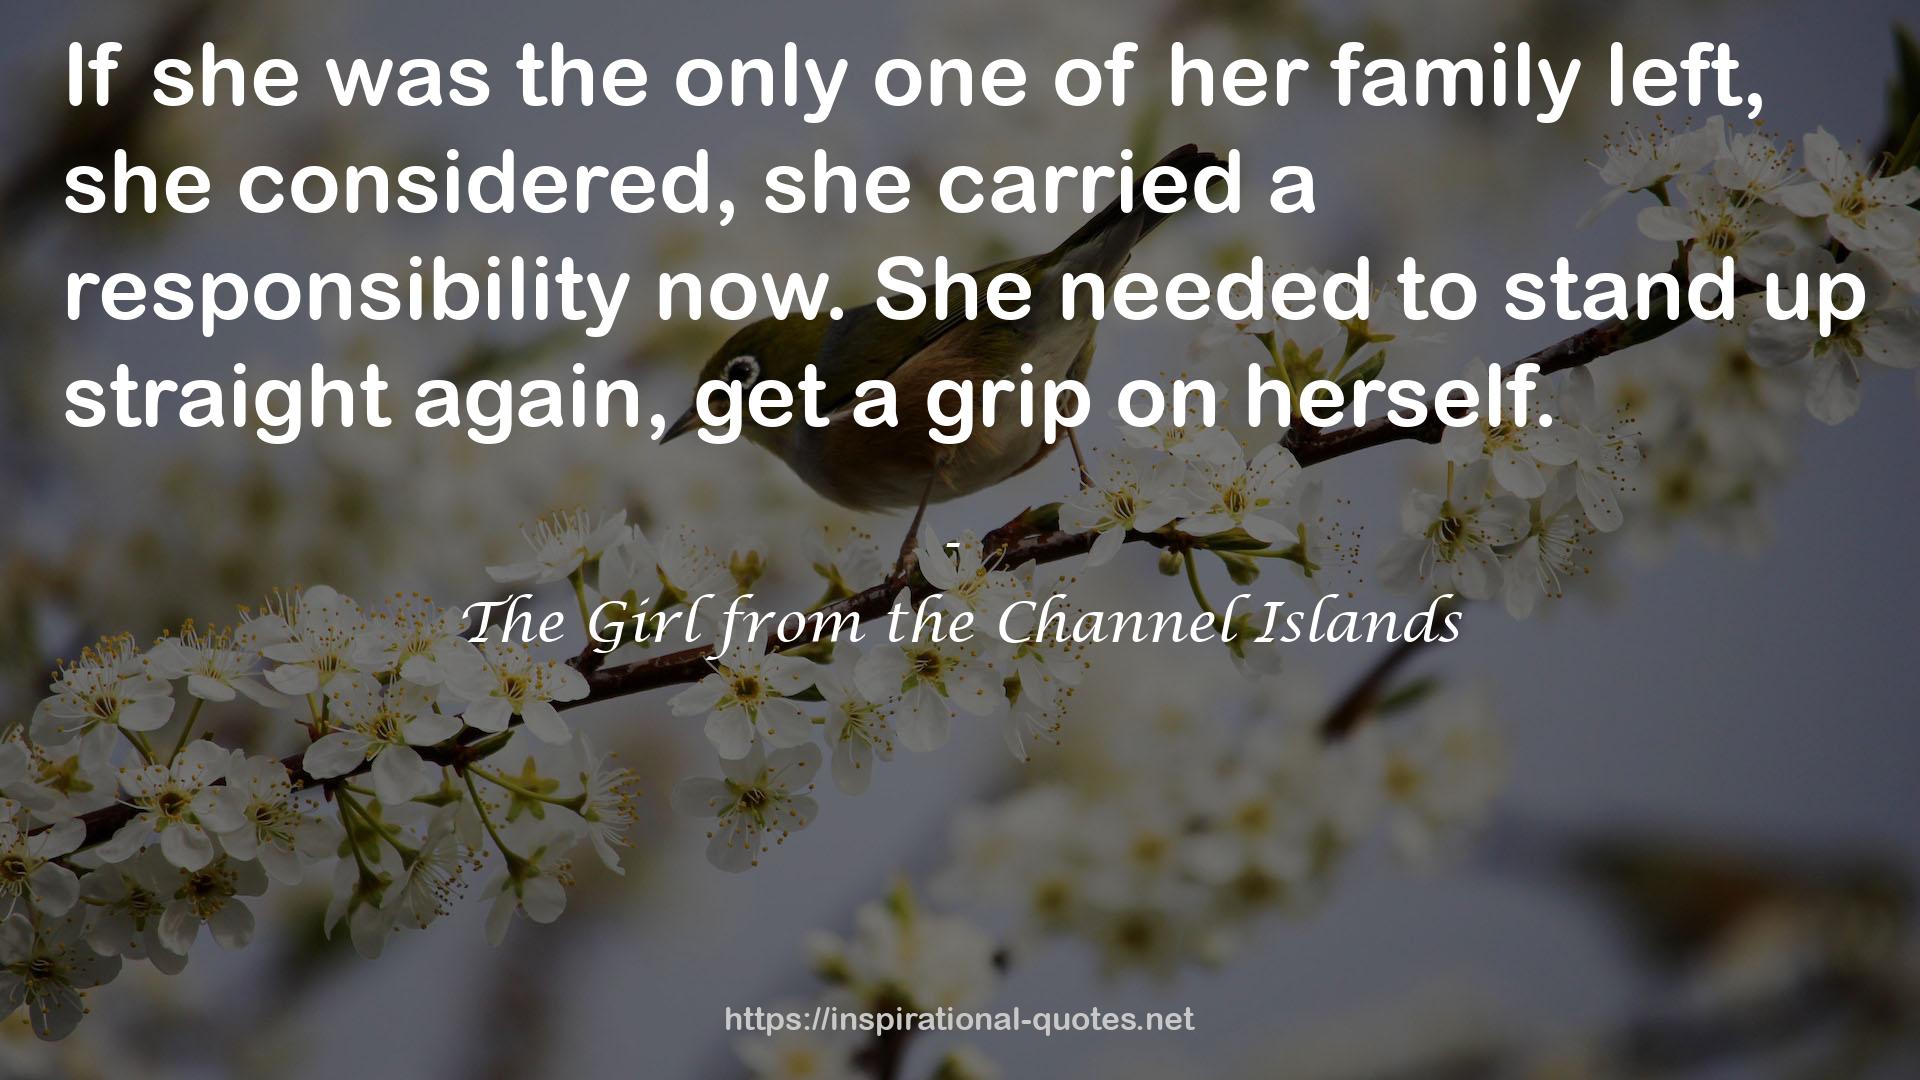 The Girl from the Channel Islands QUOTES